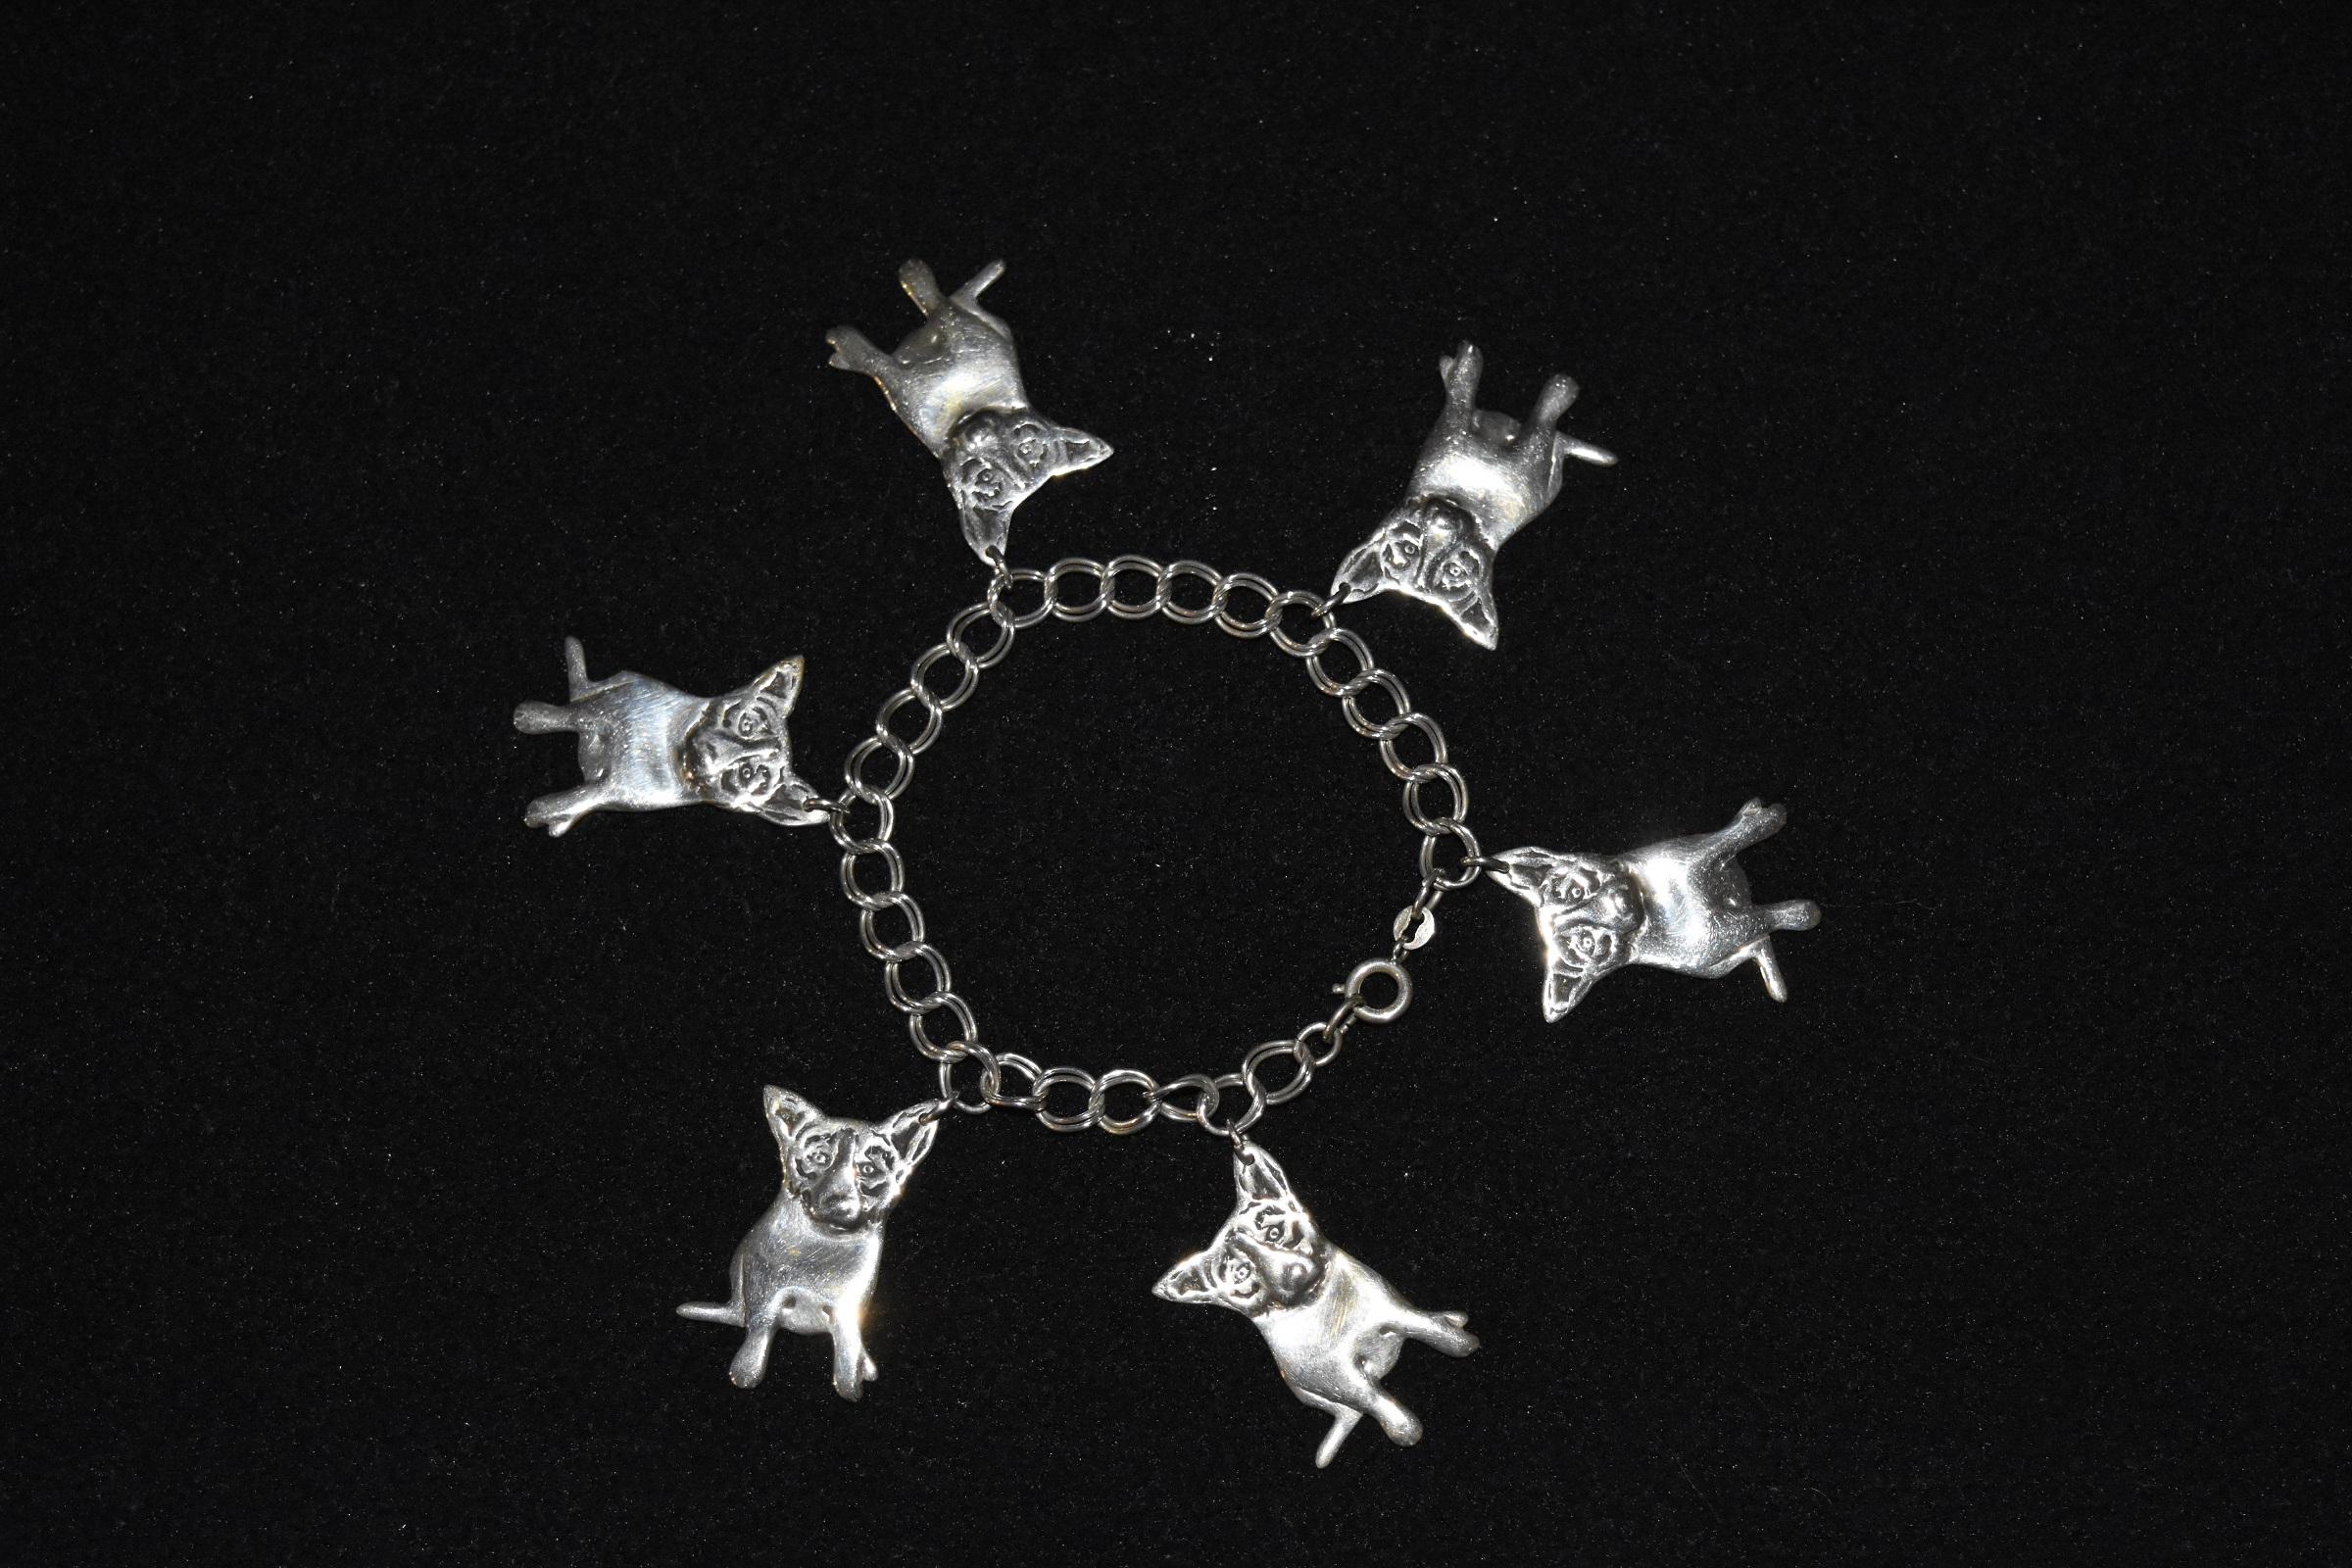 Blue Dog Sterling Silver Charm Bracelet with 6 Charms